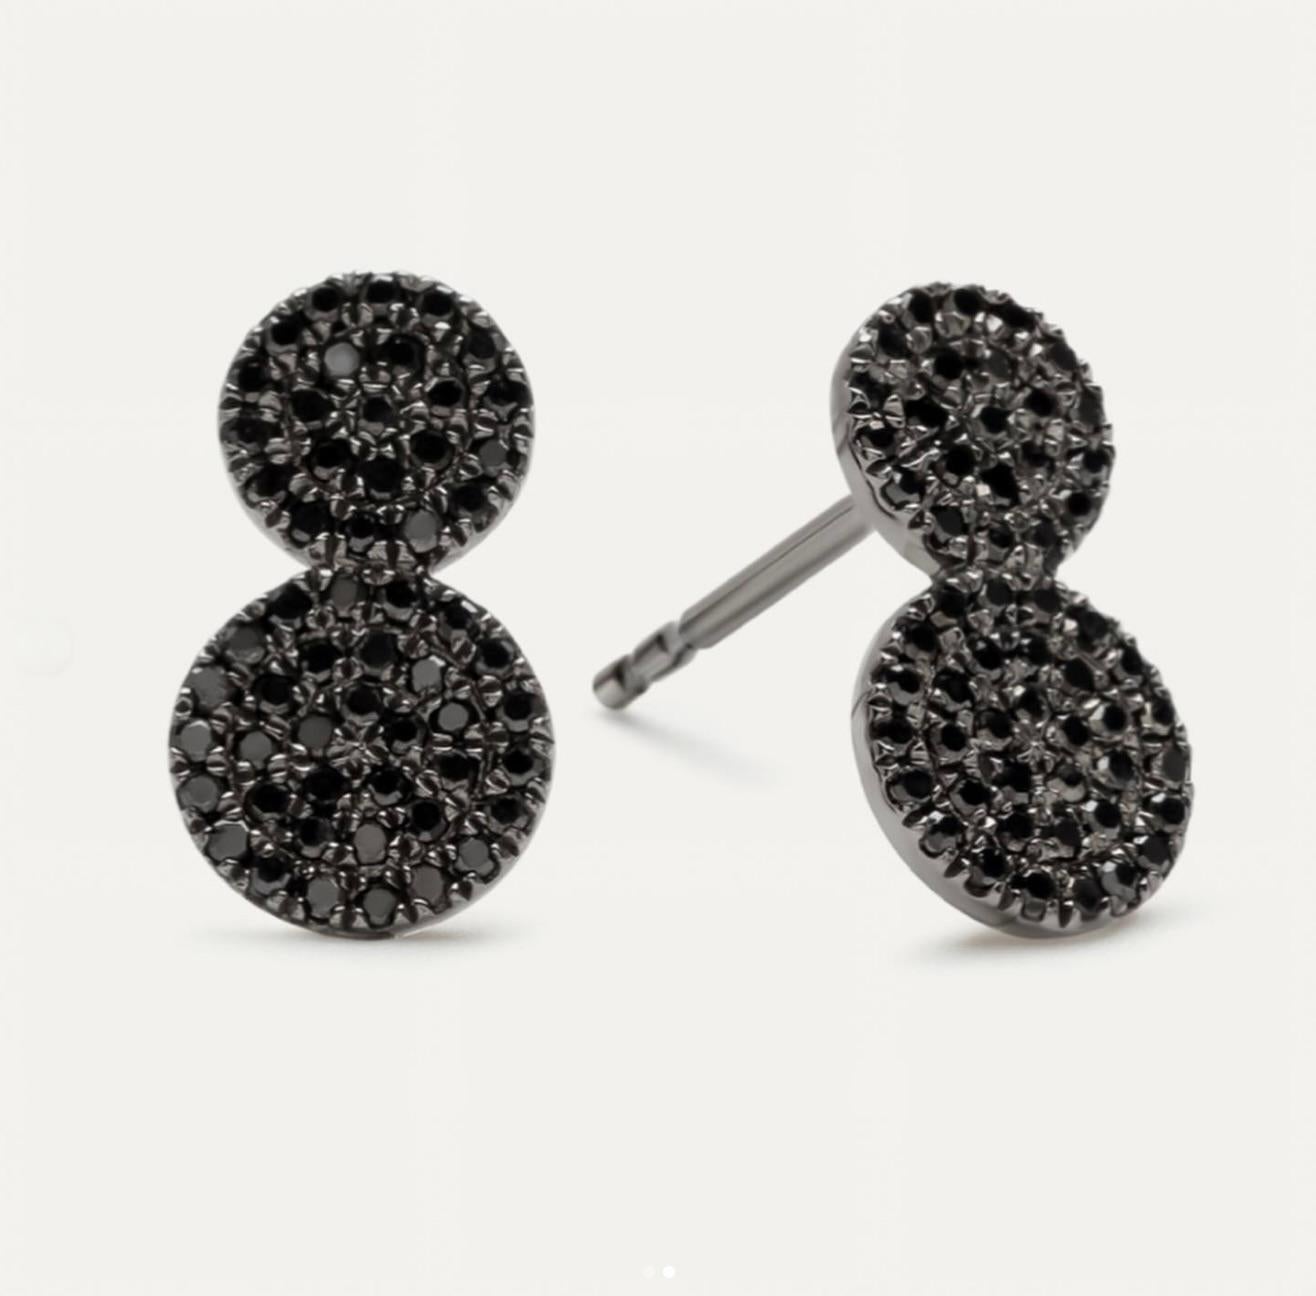 Black Diamond Disc Stud Earrings are a captivating and contemporary expression of elegance and individuality. These exquisite earrings feature lustrous black diamonds meticulously set in two circular disc shapes, creating a stunning contrast against